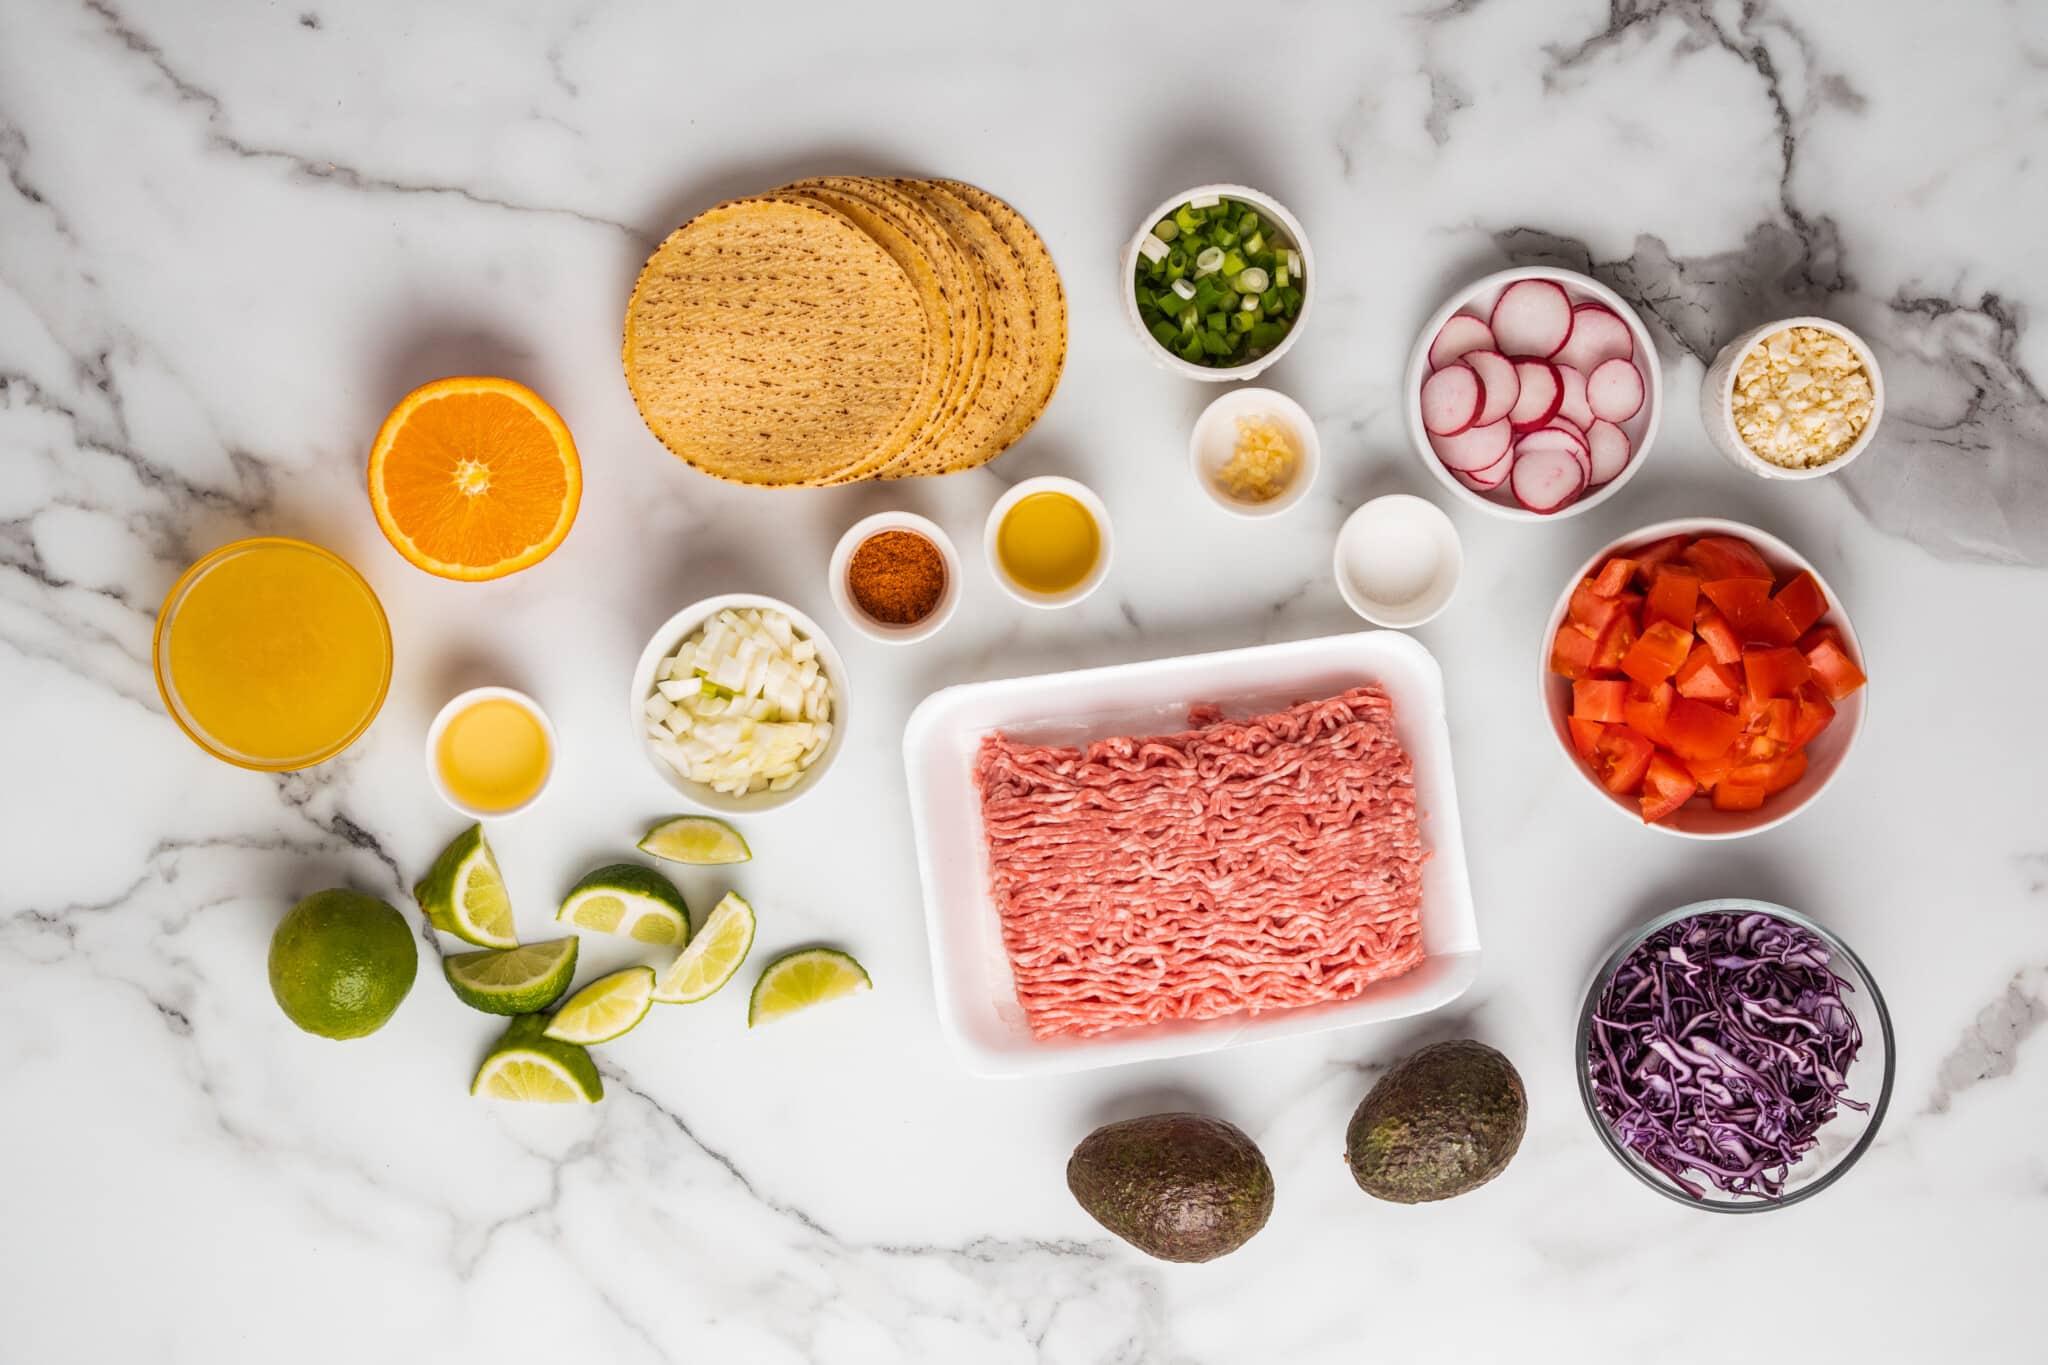 Ingredients for this pork taco recipe.